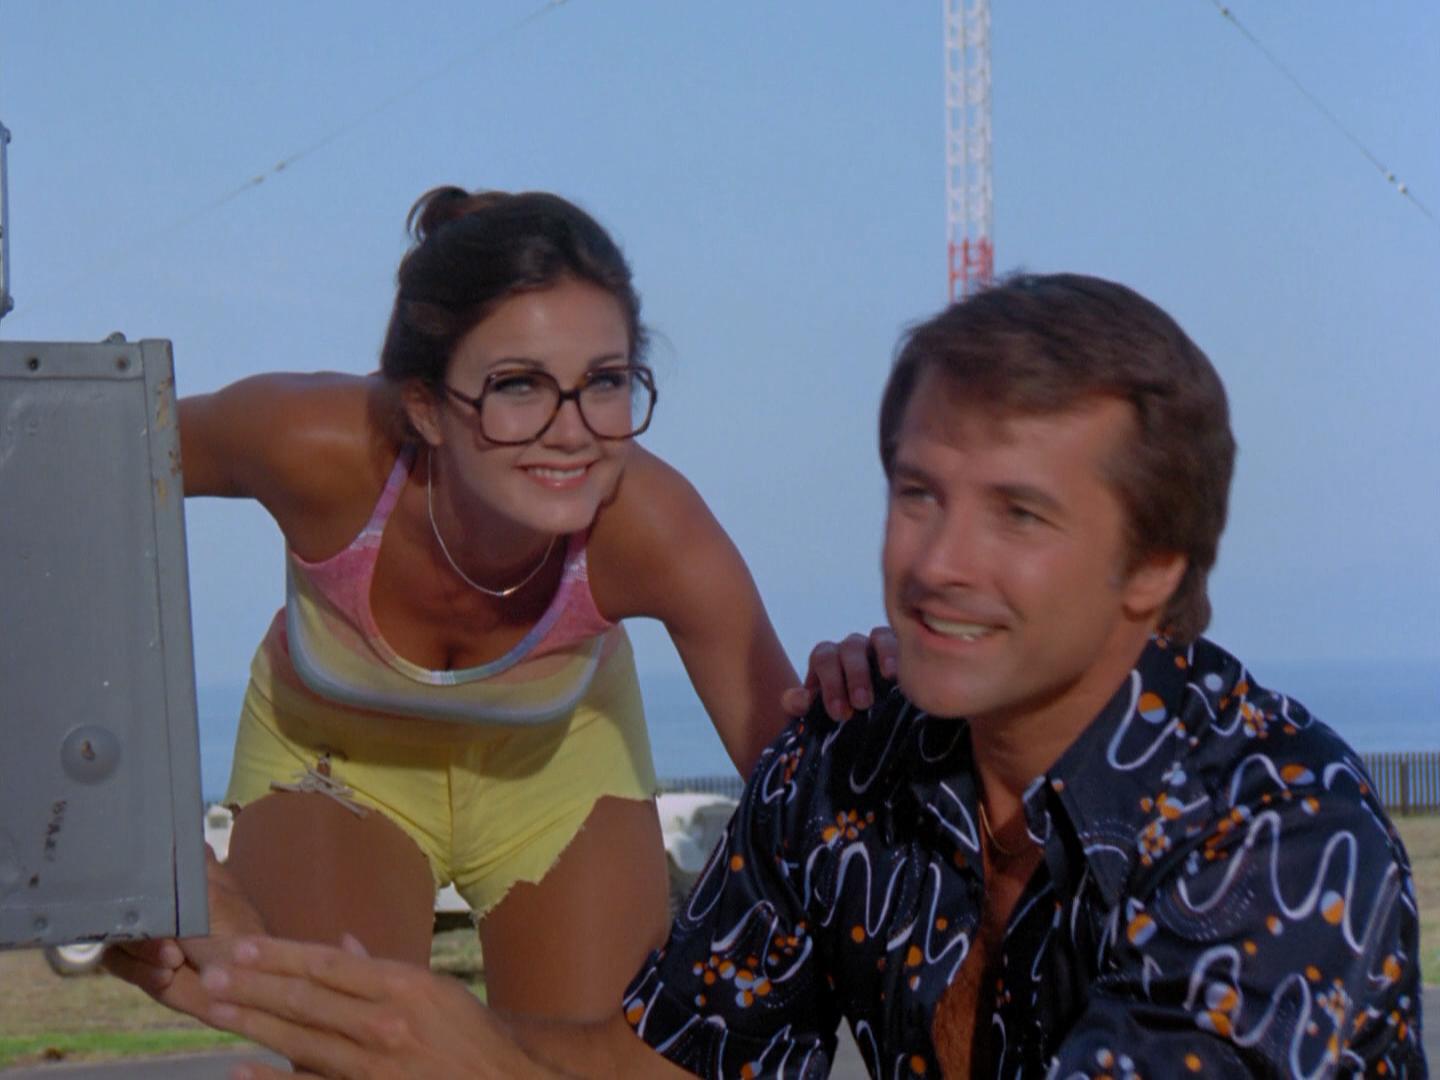 It was in its second season of "Wonder Woman" that Lynda Carter (Wonder Woman and her alter ego, Diana Prince) and Steve Trevor, Jr. (Lyle Waggoner) found themselves in the Bermuda Triangle.